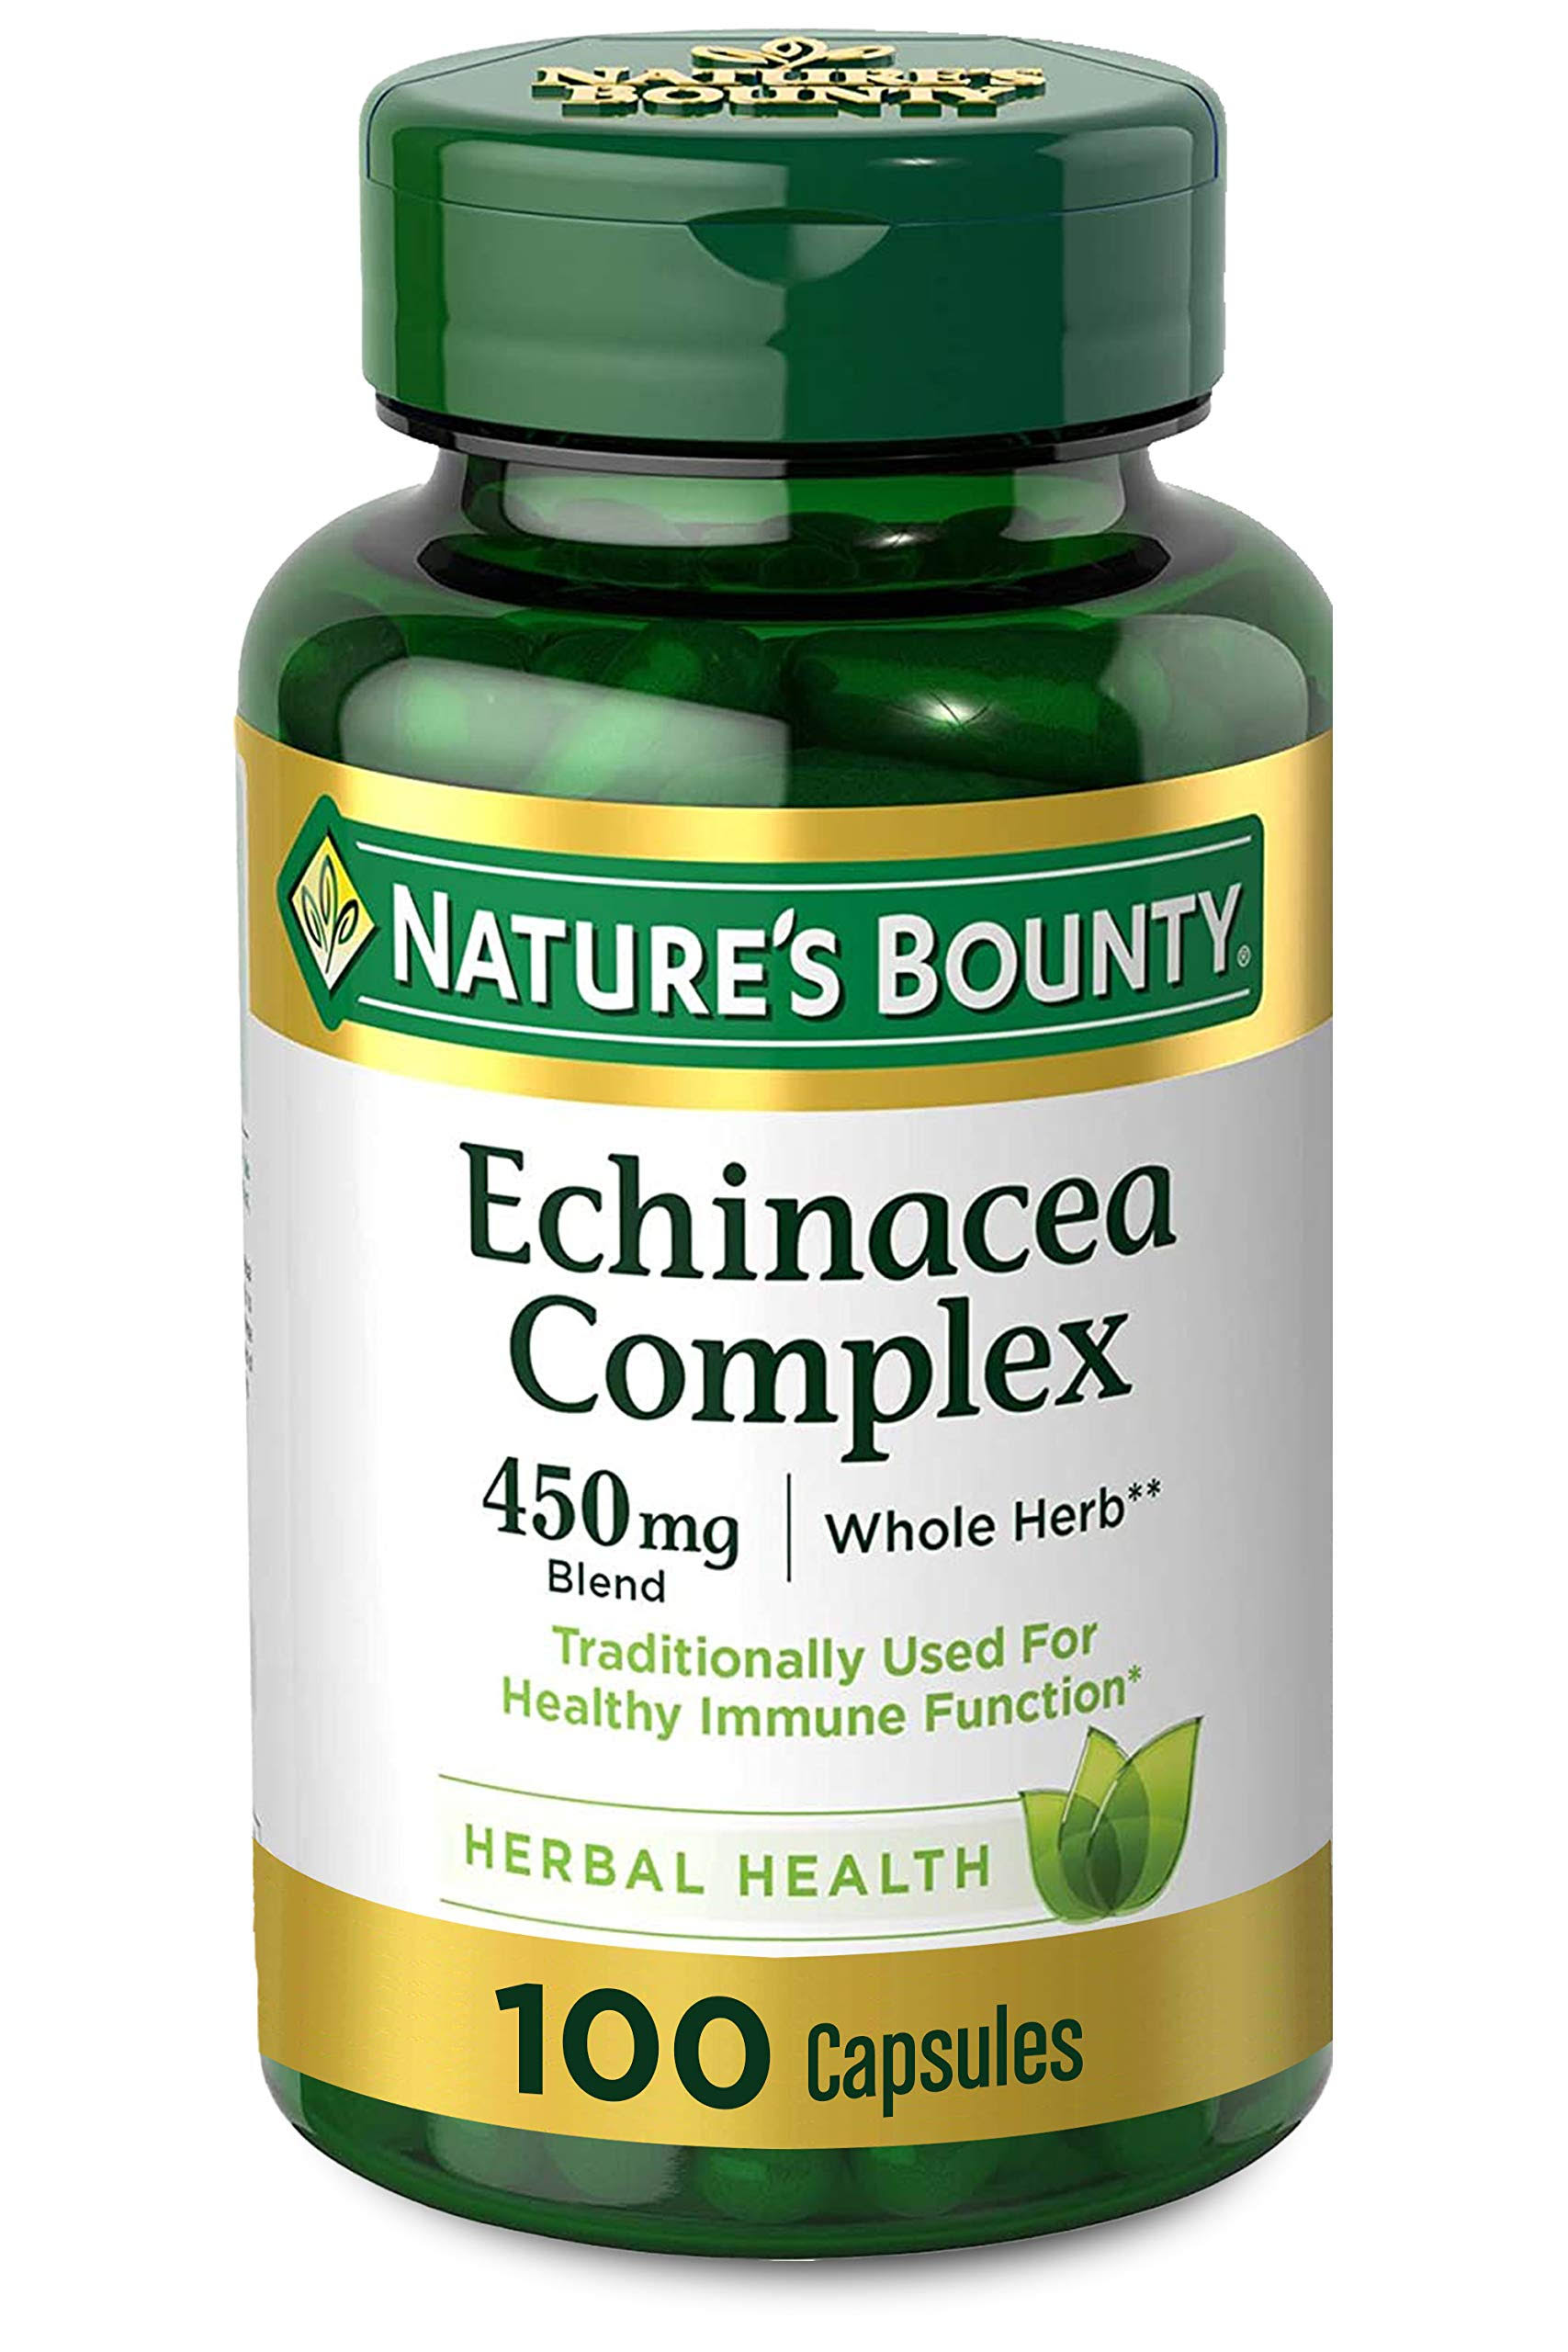 Nature's Bounty Echinacea Complex Supplement - 450mg, 100 Capsules